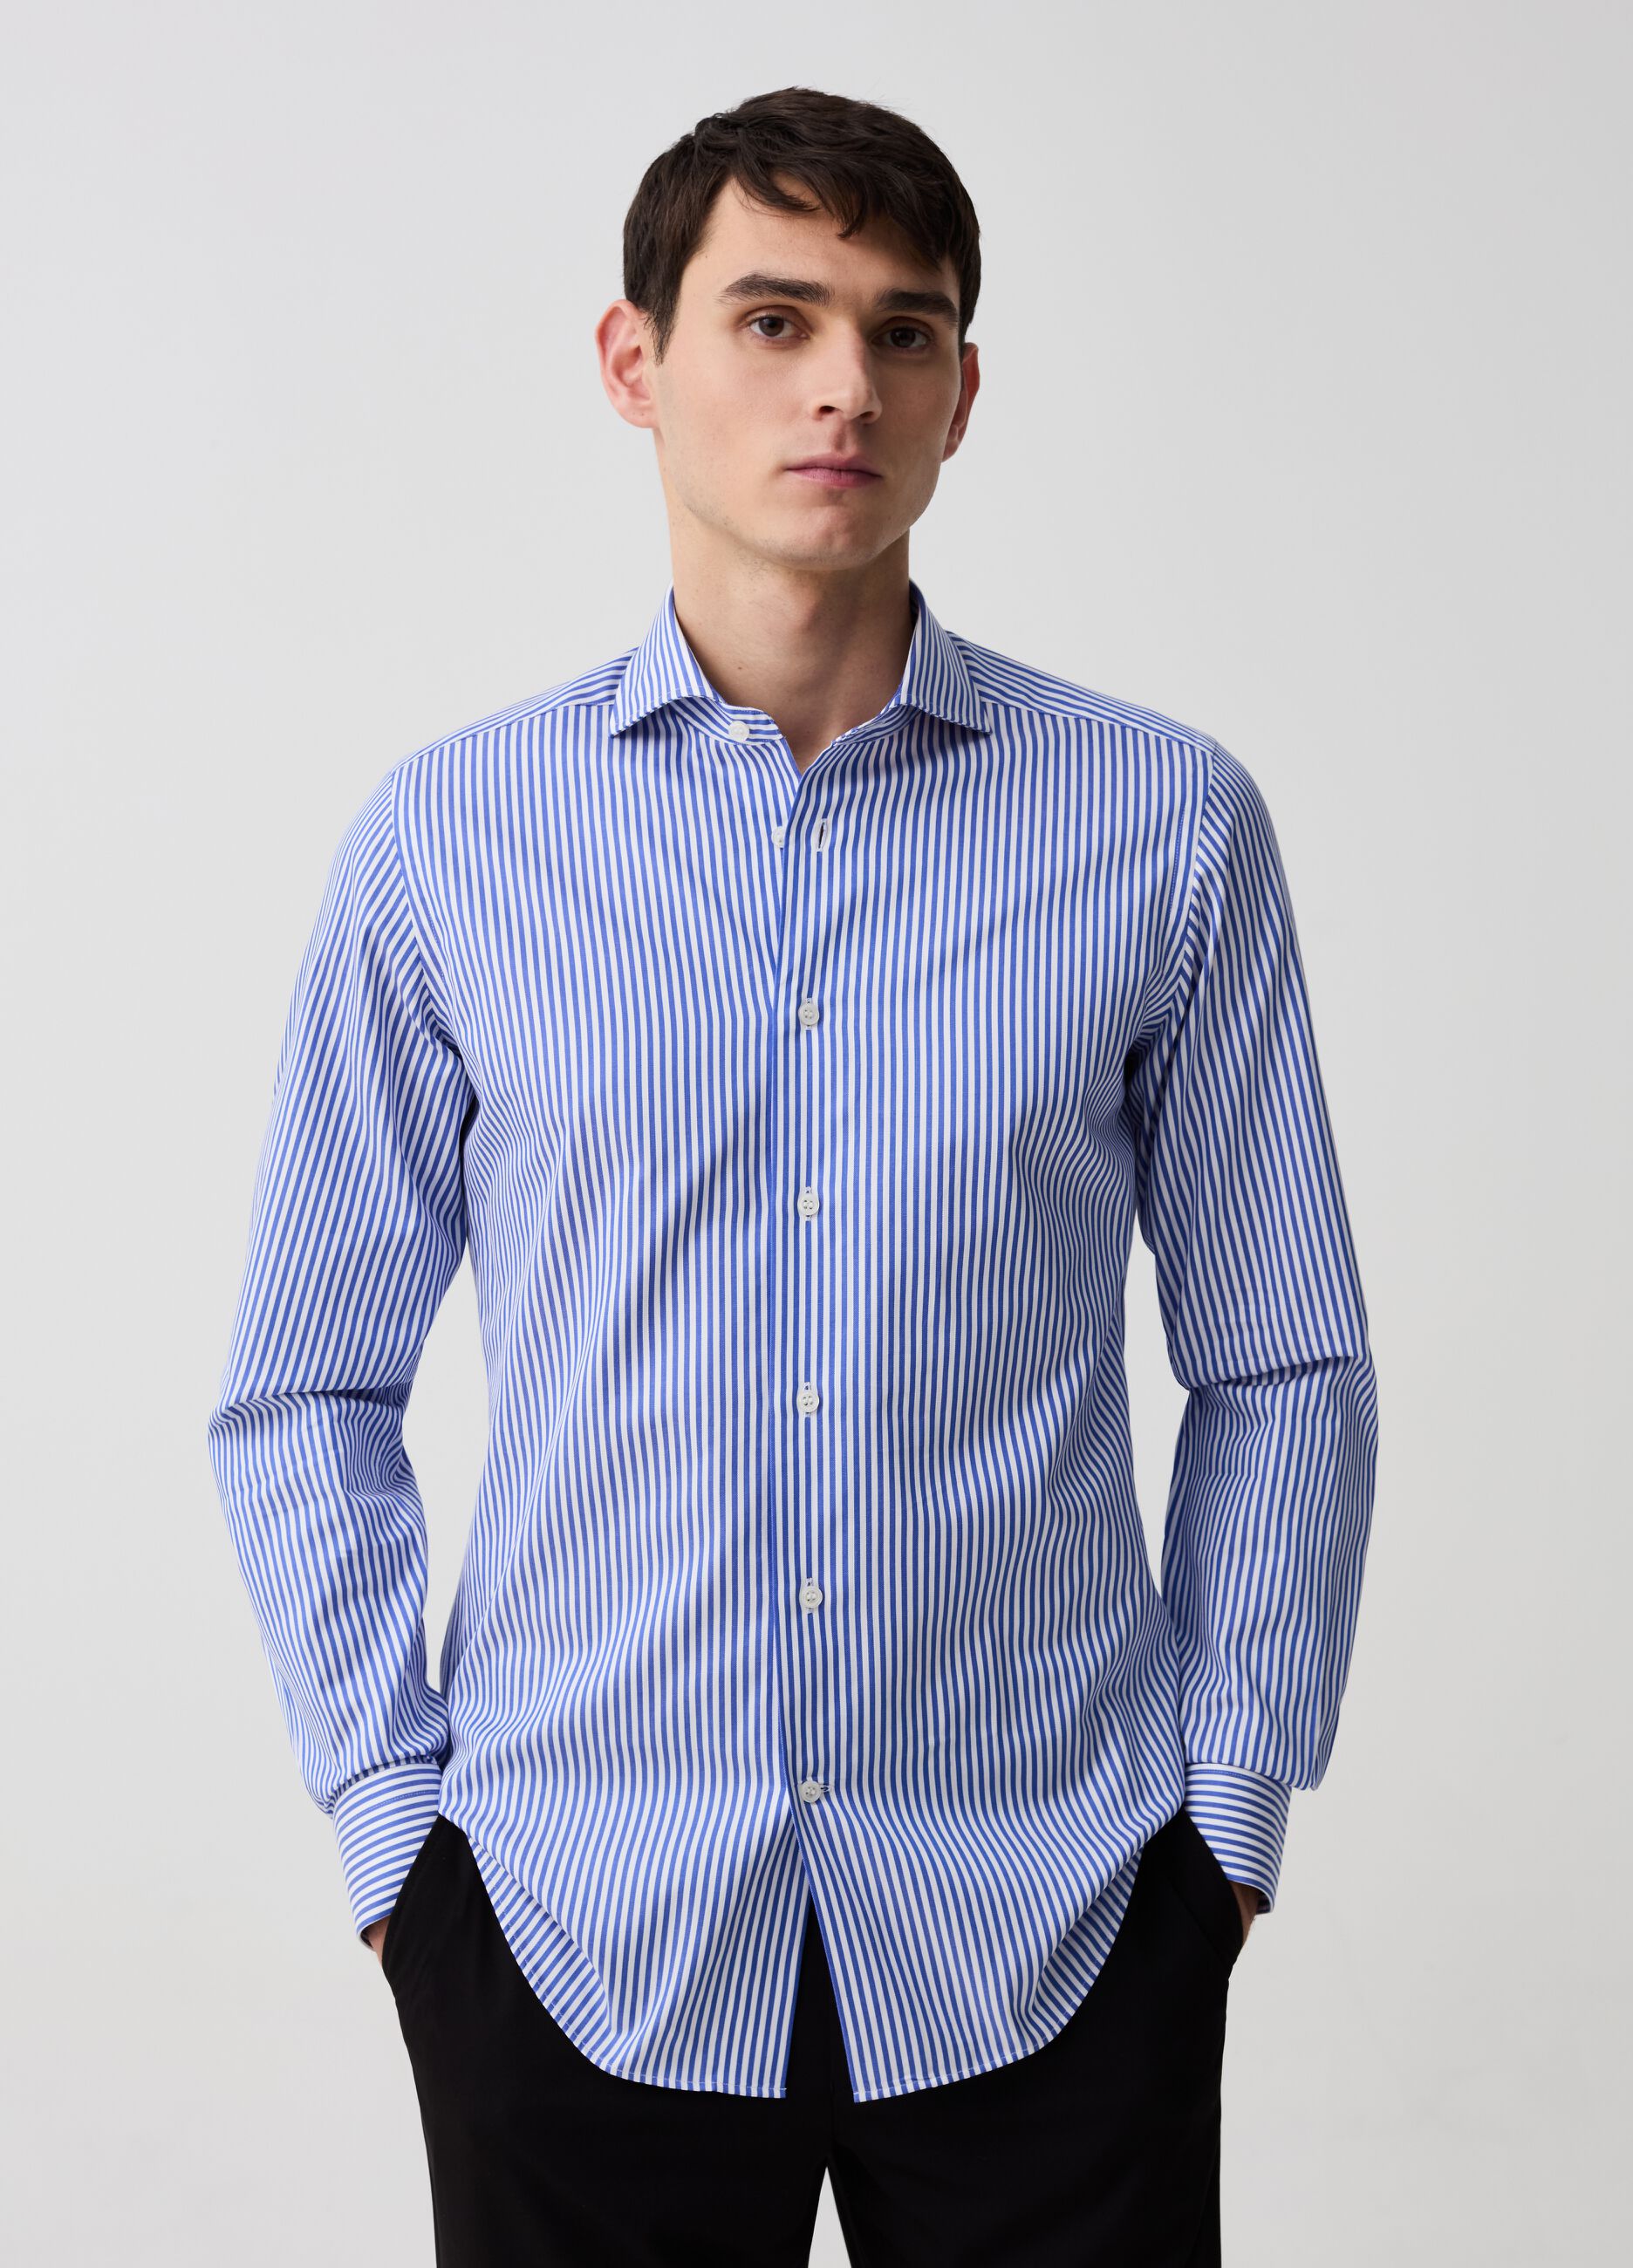 Slim-fit shirt in double-twist striped cotton